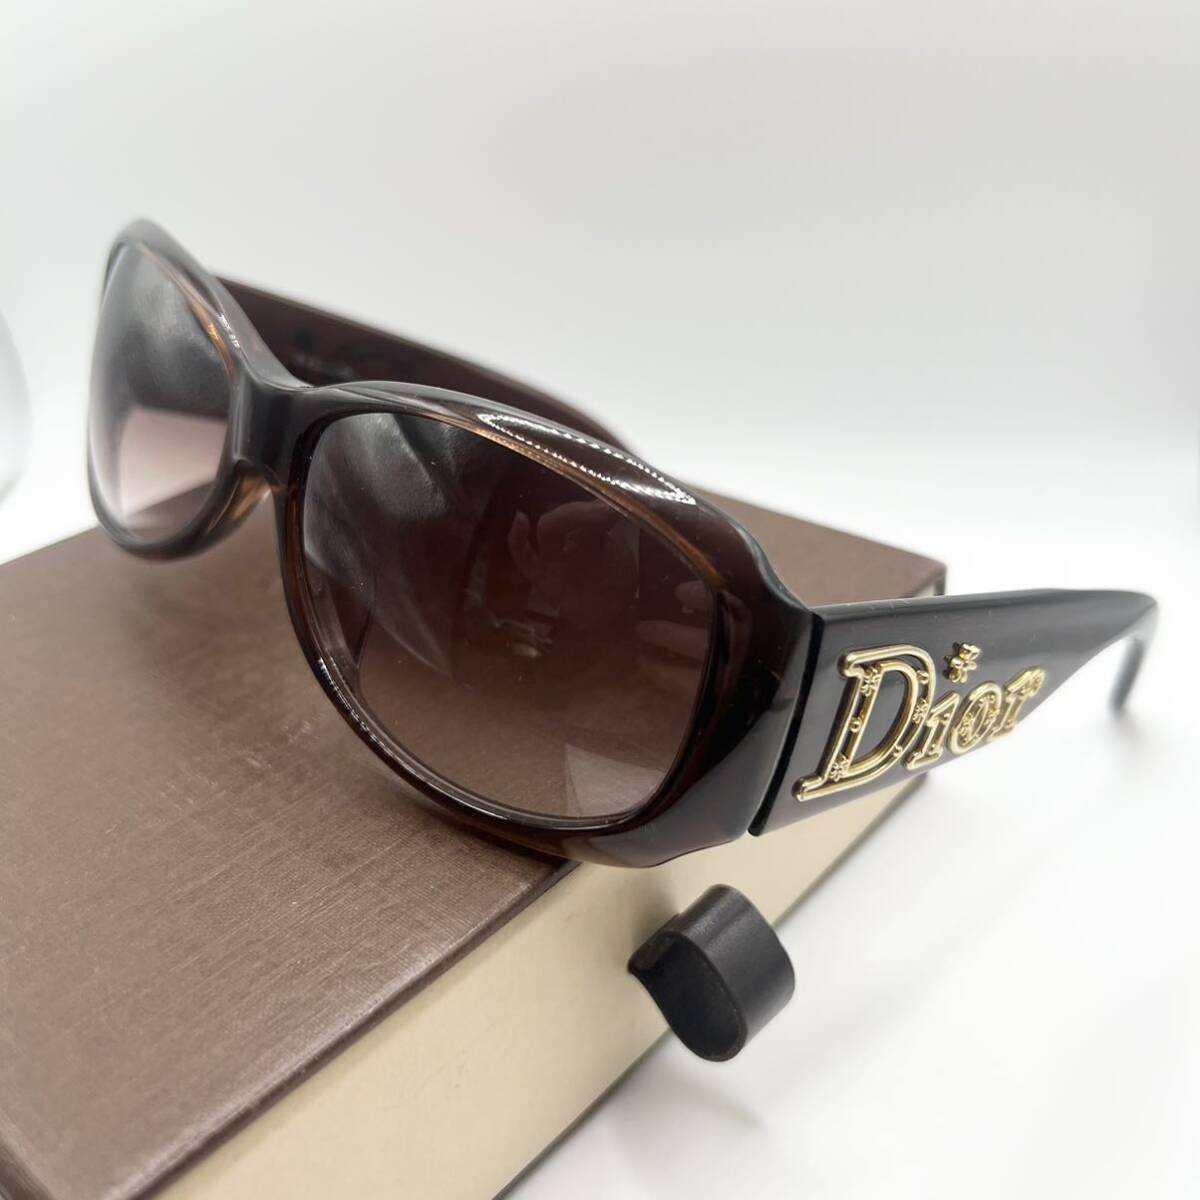 ChristianDior Christian Dior sunglasses flower Logo largish Logo I wear Brown day except day difference . free shipping 